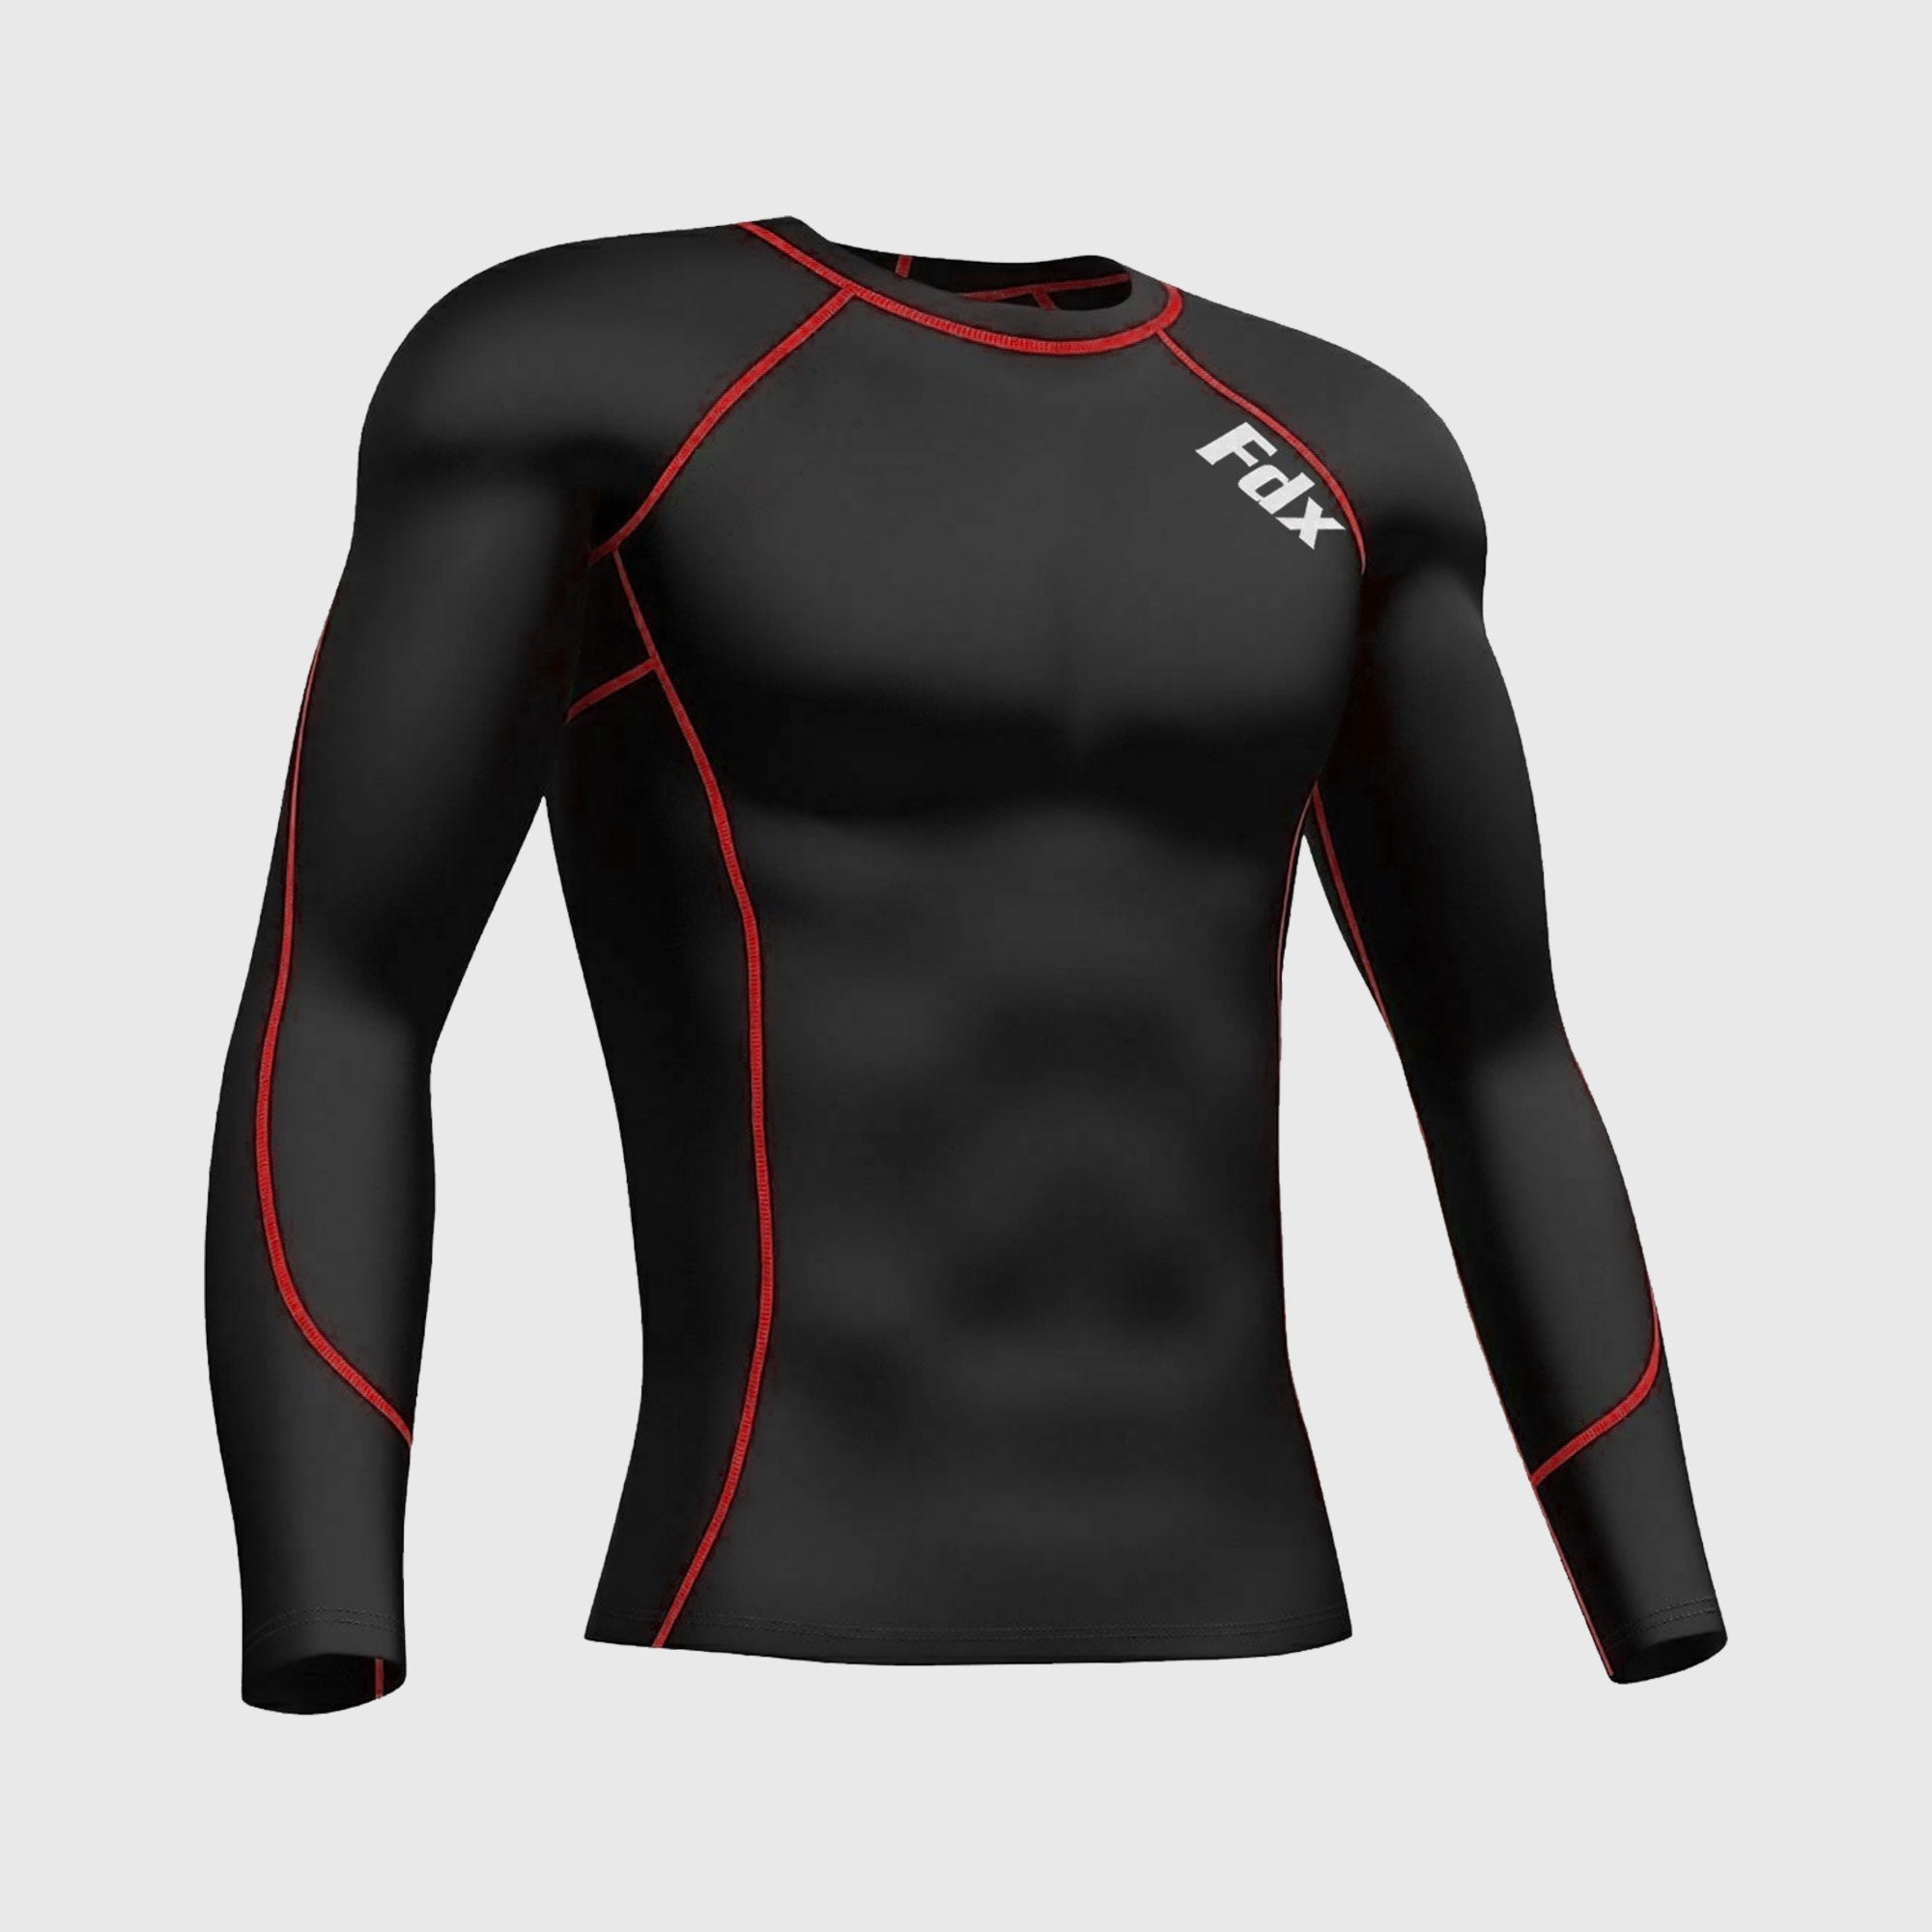 Fdx Thermolinx Red Men's Base Layer Thermal Winter Compression Top